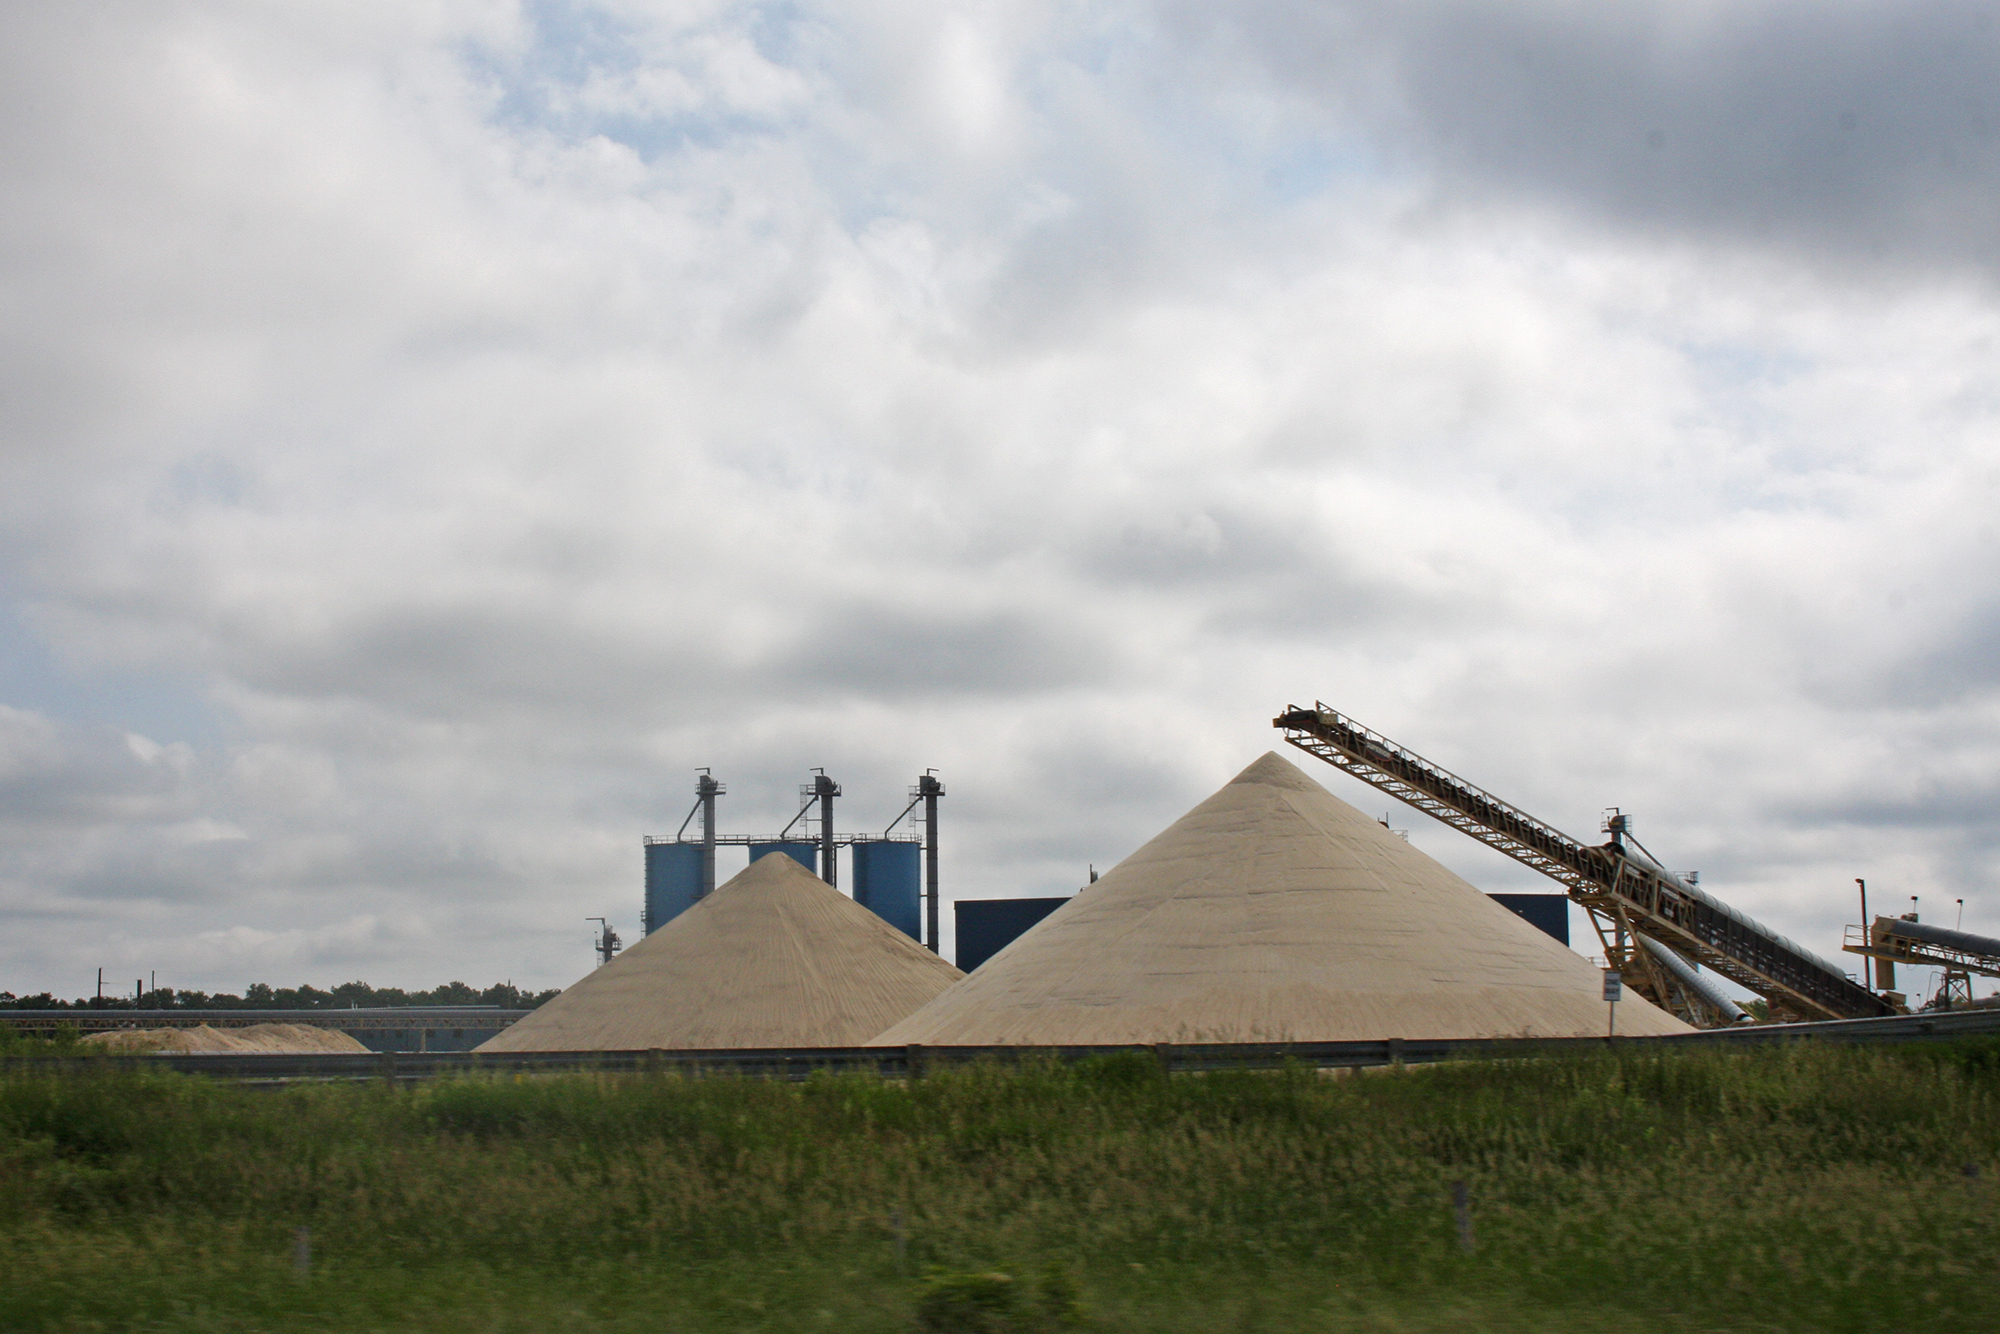 Demand for Wisconsin frac sand increased slightly in 2021